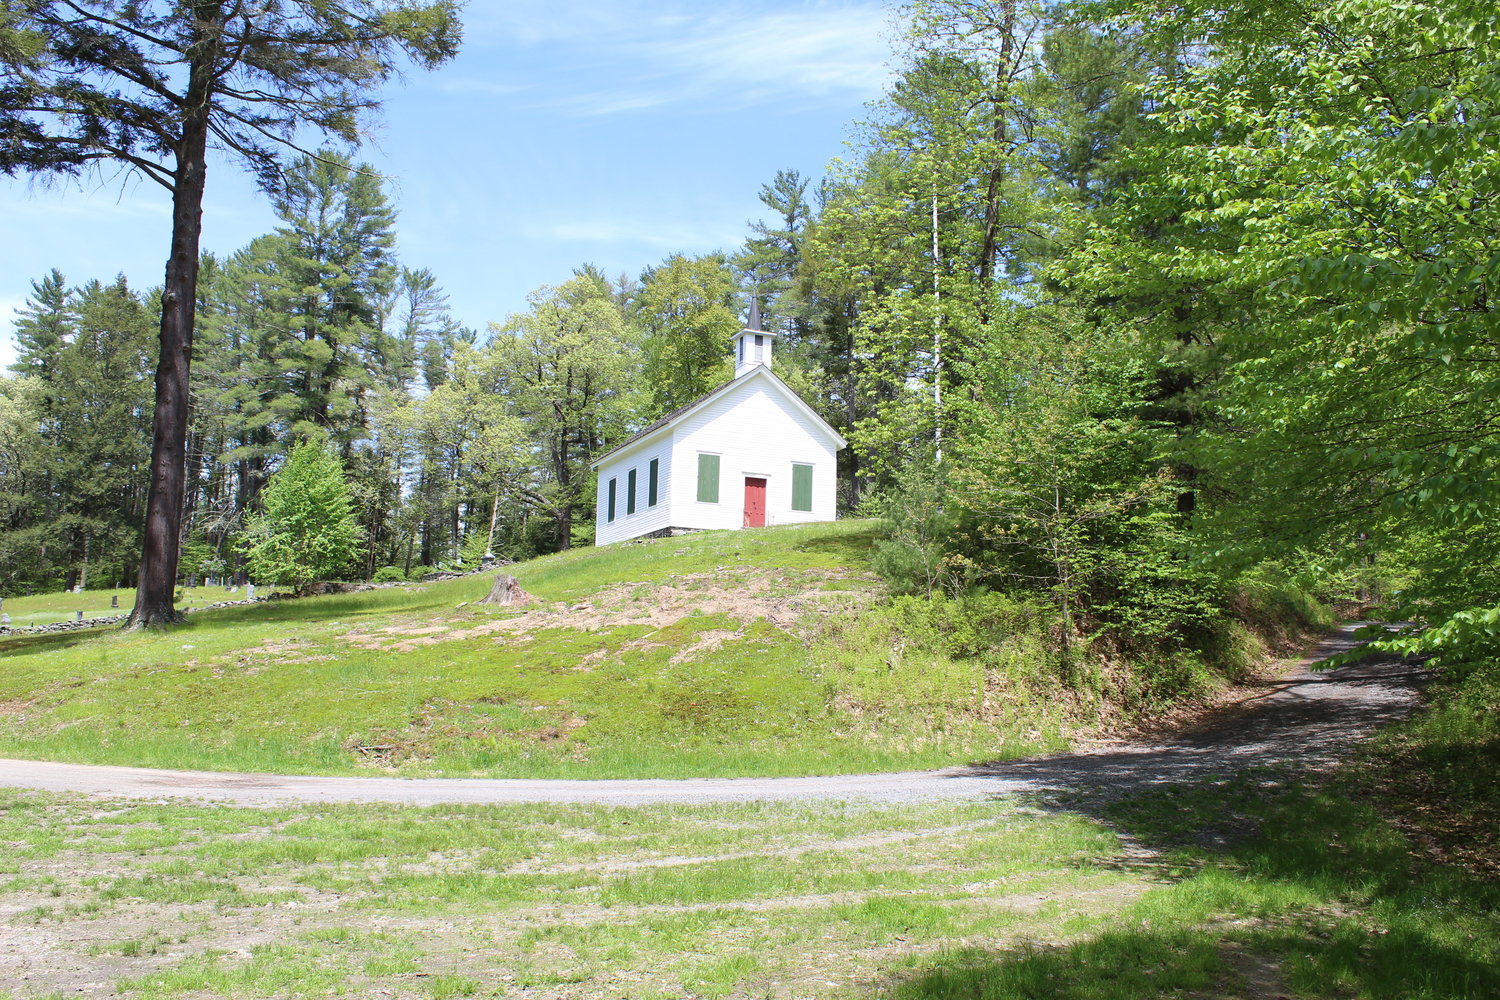 The old Baptist church served the Tusten Settlement.